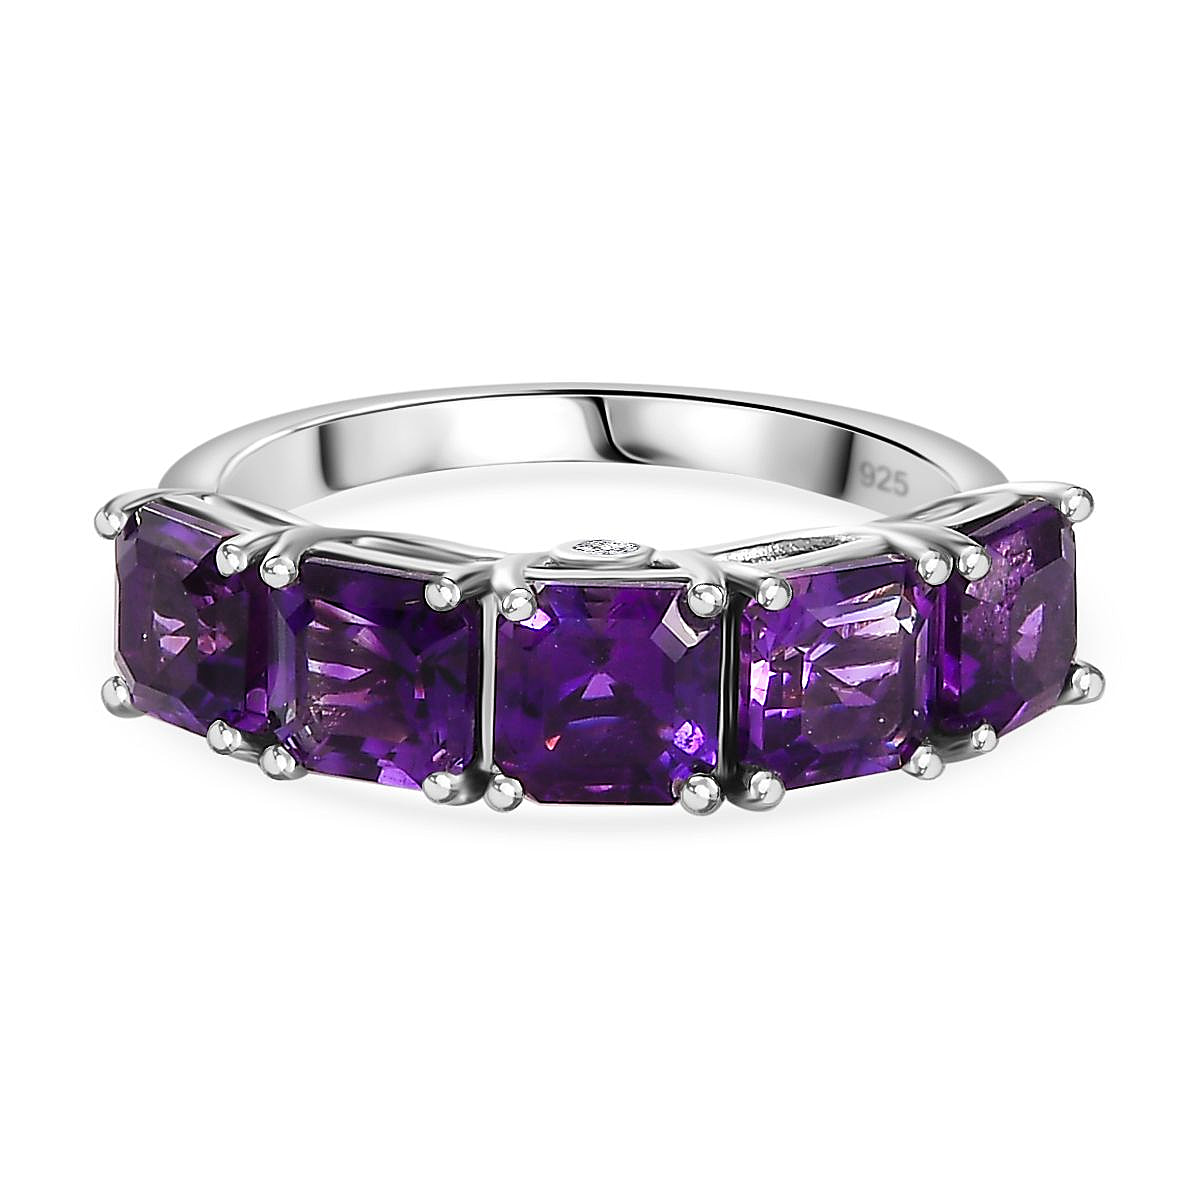 Moroccan Amethyst & Natural Zircon 5 Stone Ring in Platinum Overlay Sterling Silver 2.85 Ct.